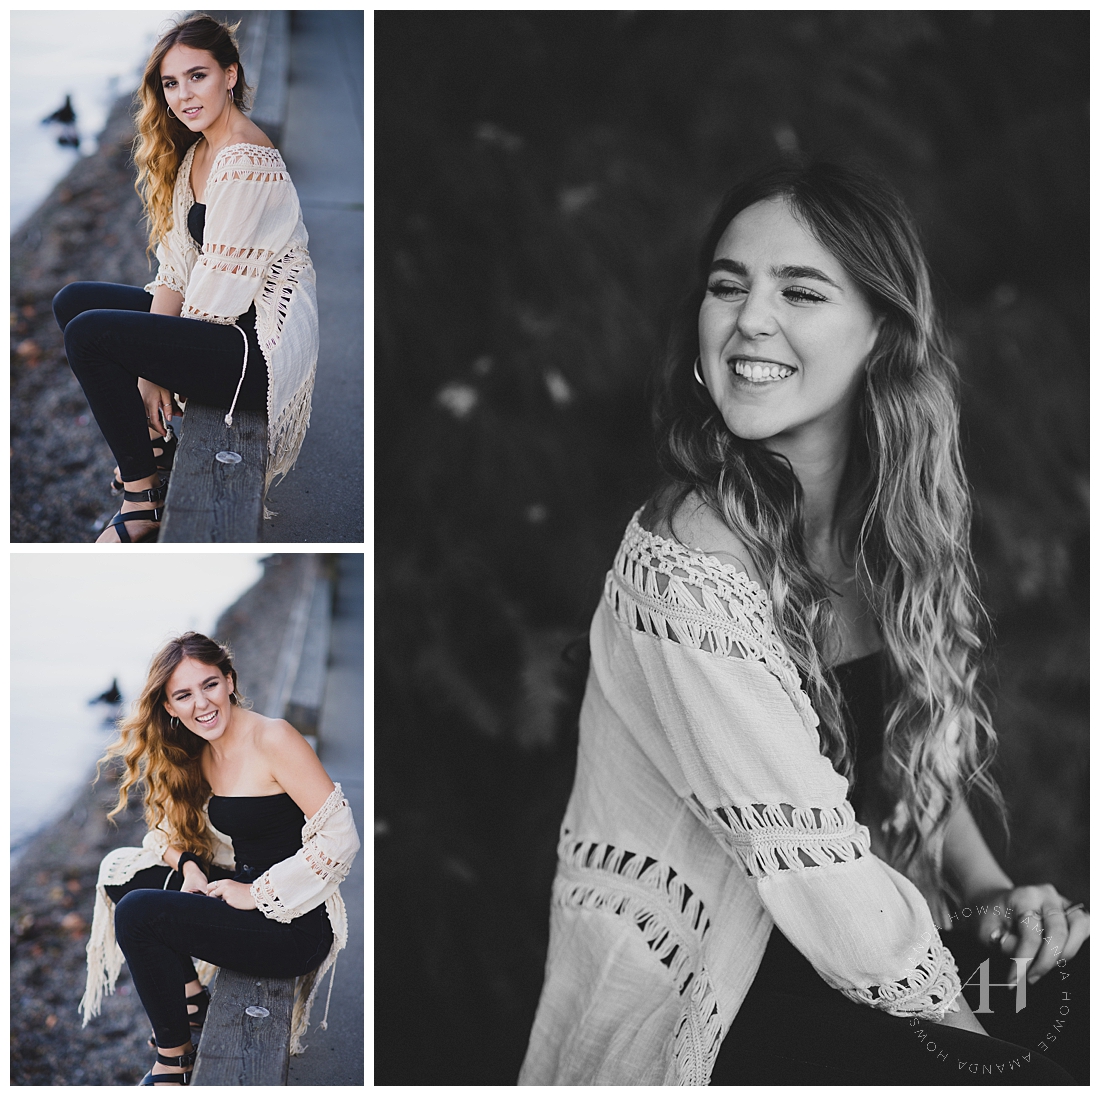 Owen Beach Senior Portrait Session | How to Style an All-Black Outfit for Senior Portraits | Photographed by Tacoma Senior Photographer Amanda Howse